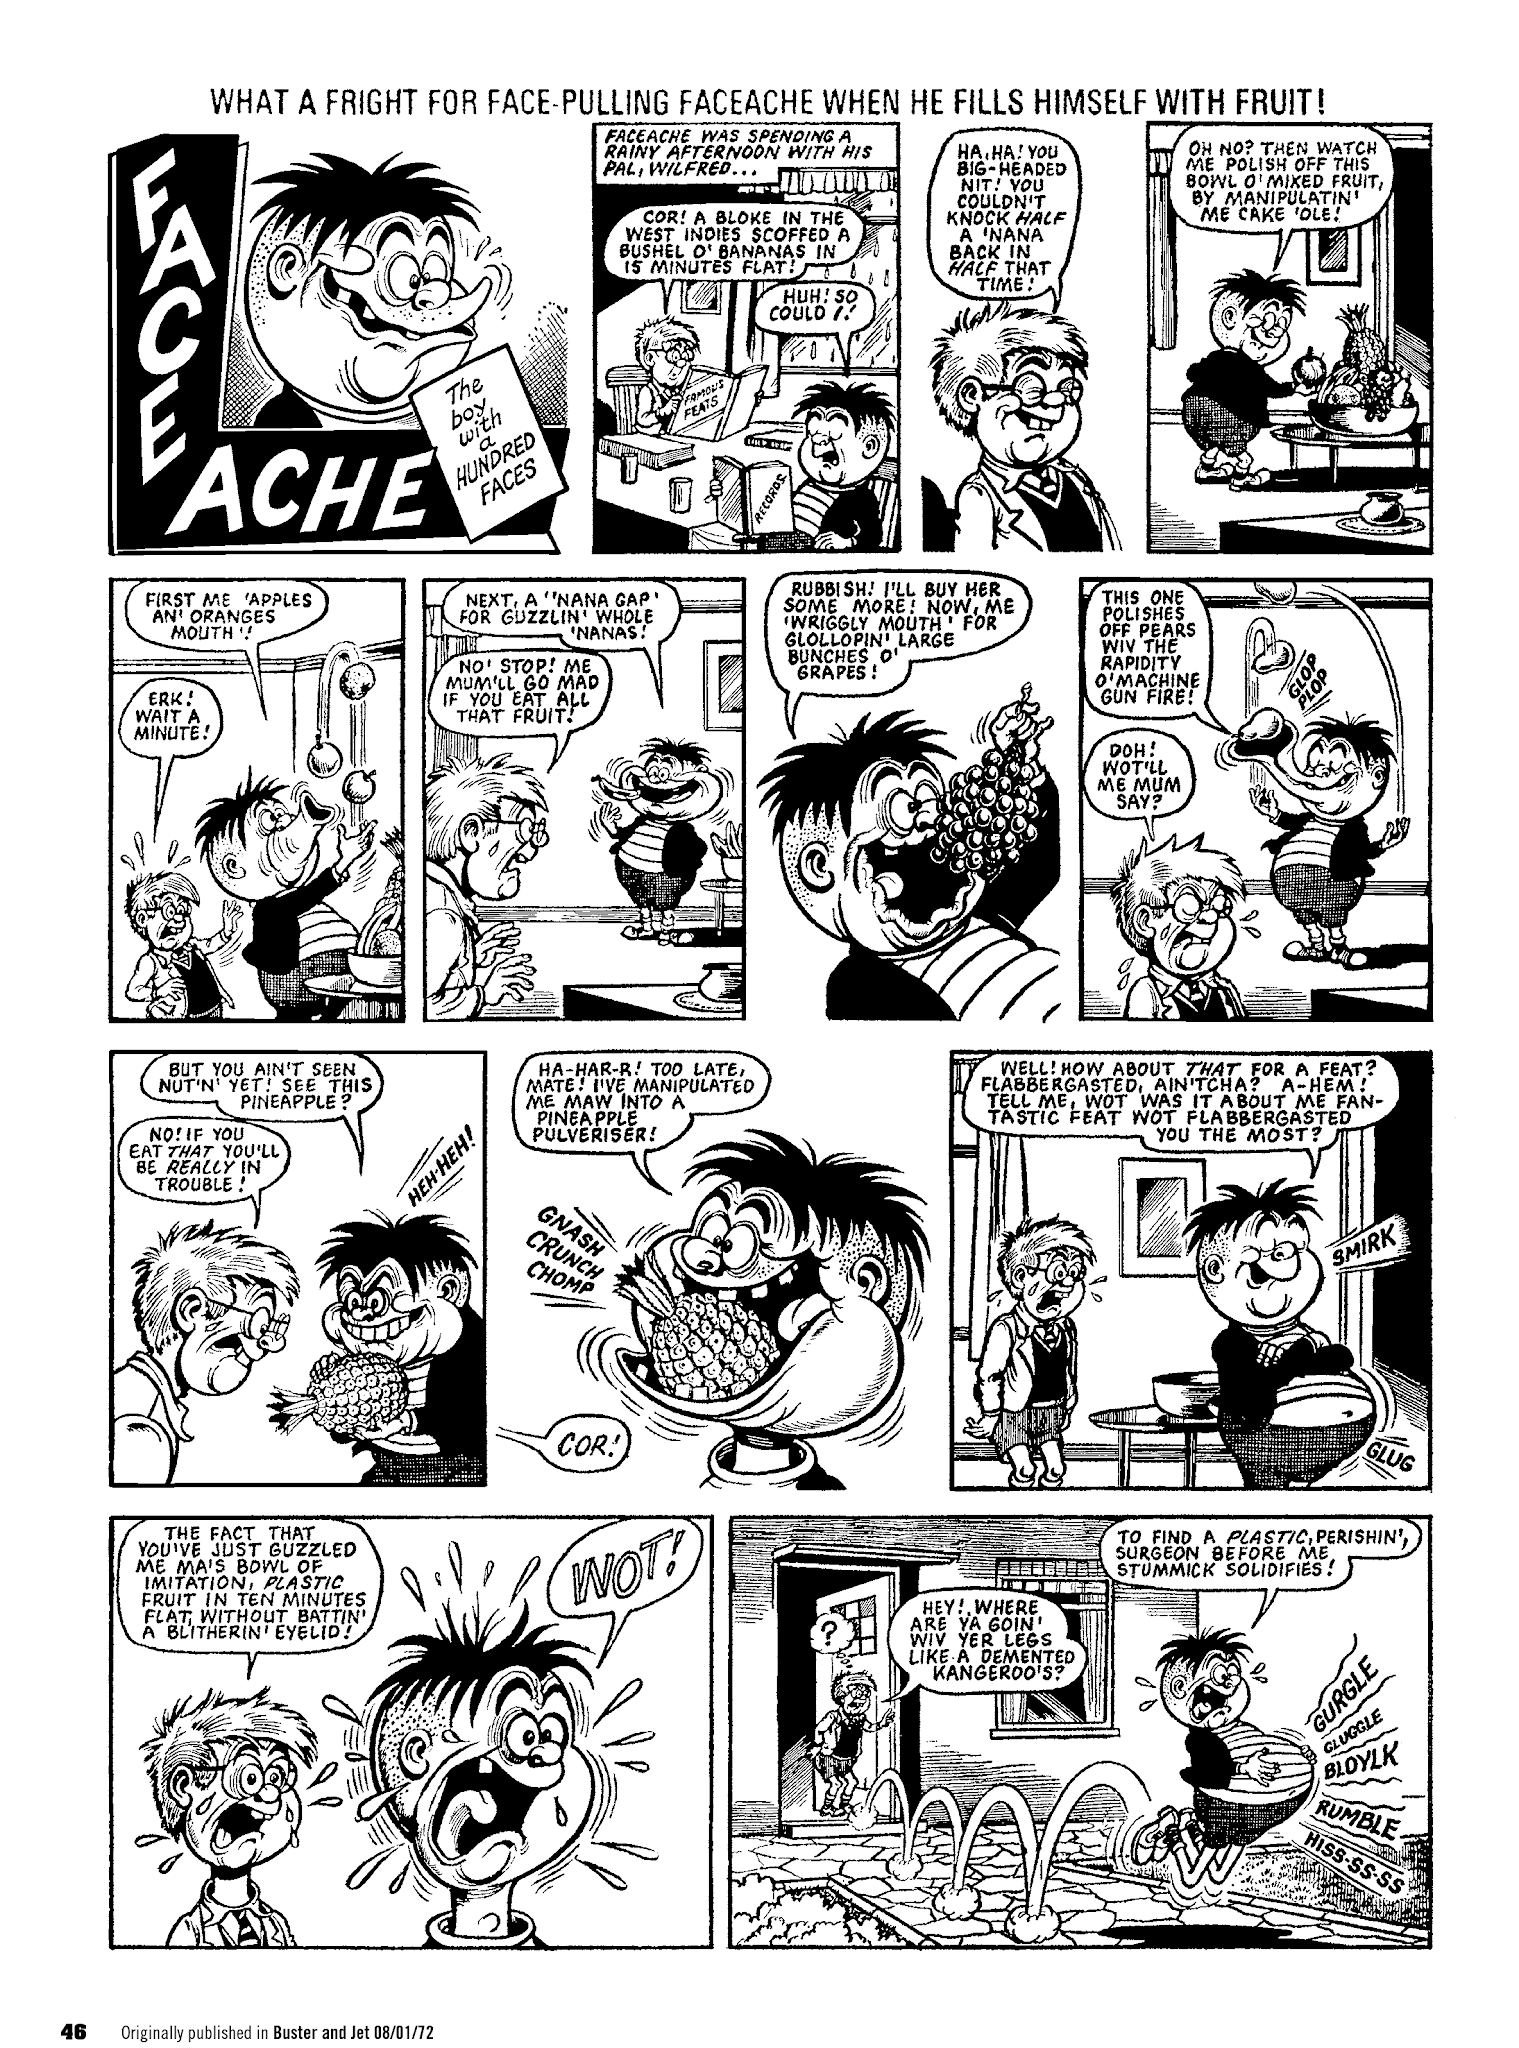 Read online Faceache: The First Hundred Scrunges comic -  Issue # TPB 1 - 48